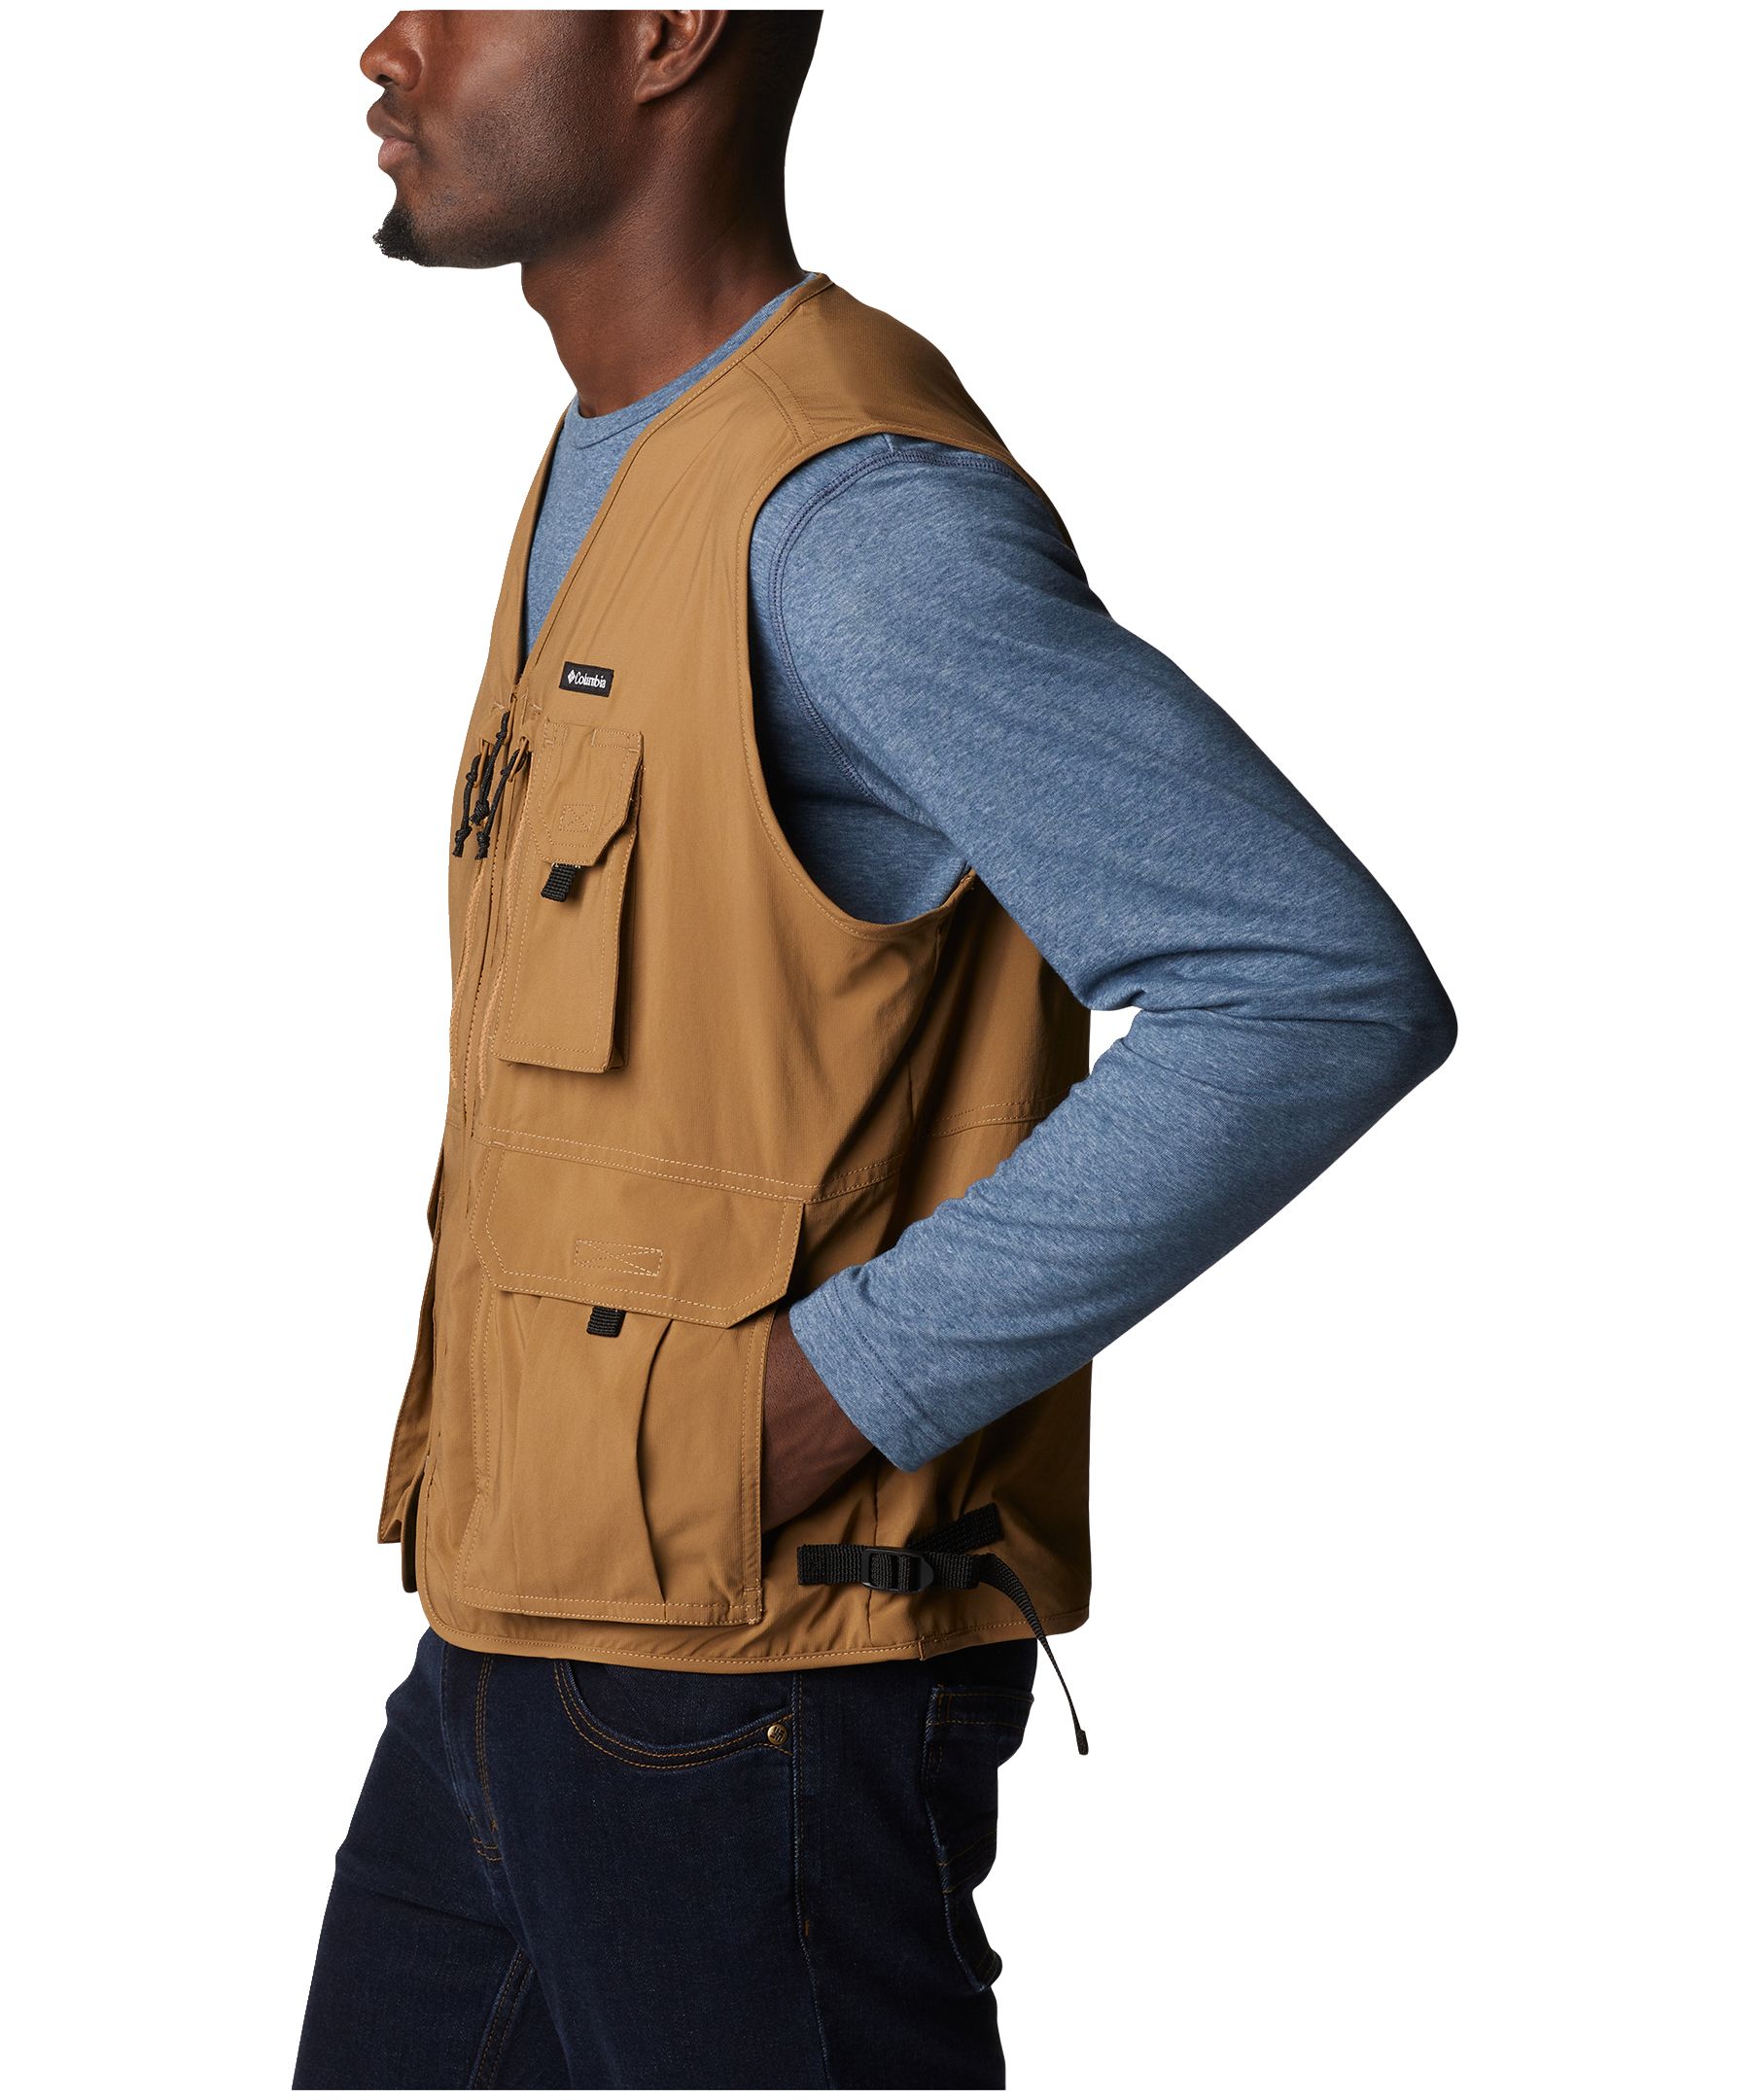  Men's Sleeveless Jacket and Long Pants Outfits Outdoor